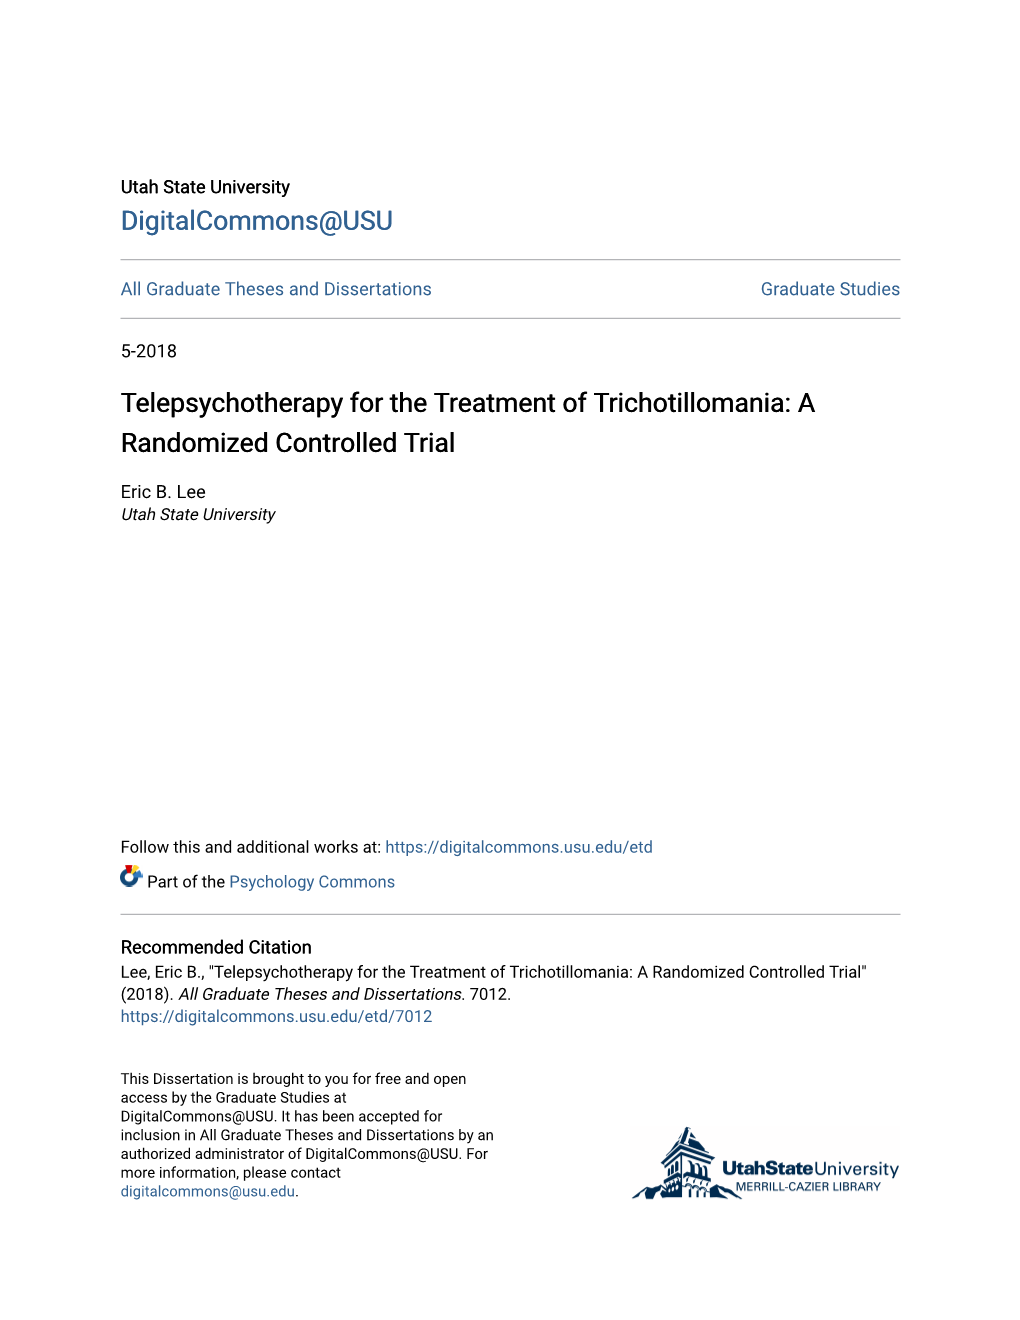 Telepsychotherapy for the Treatment of Trichotillomania: a Randomized Controlled Trial